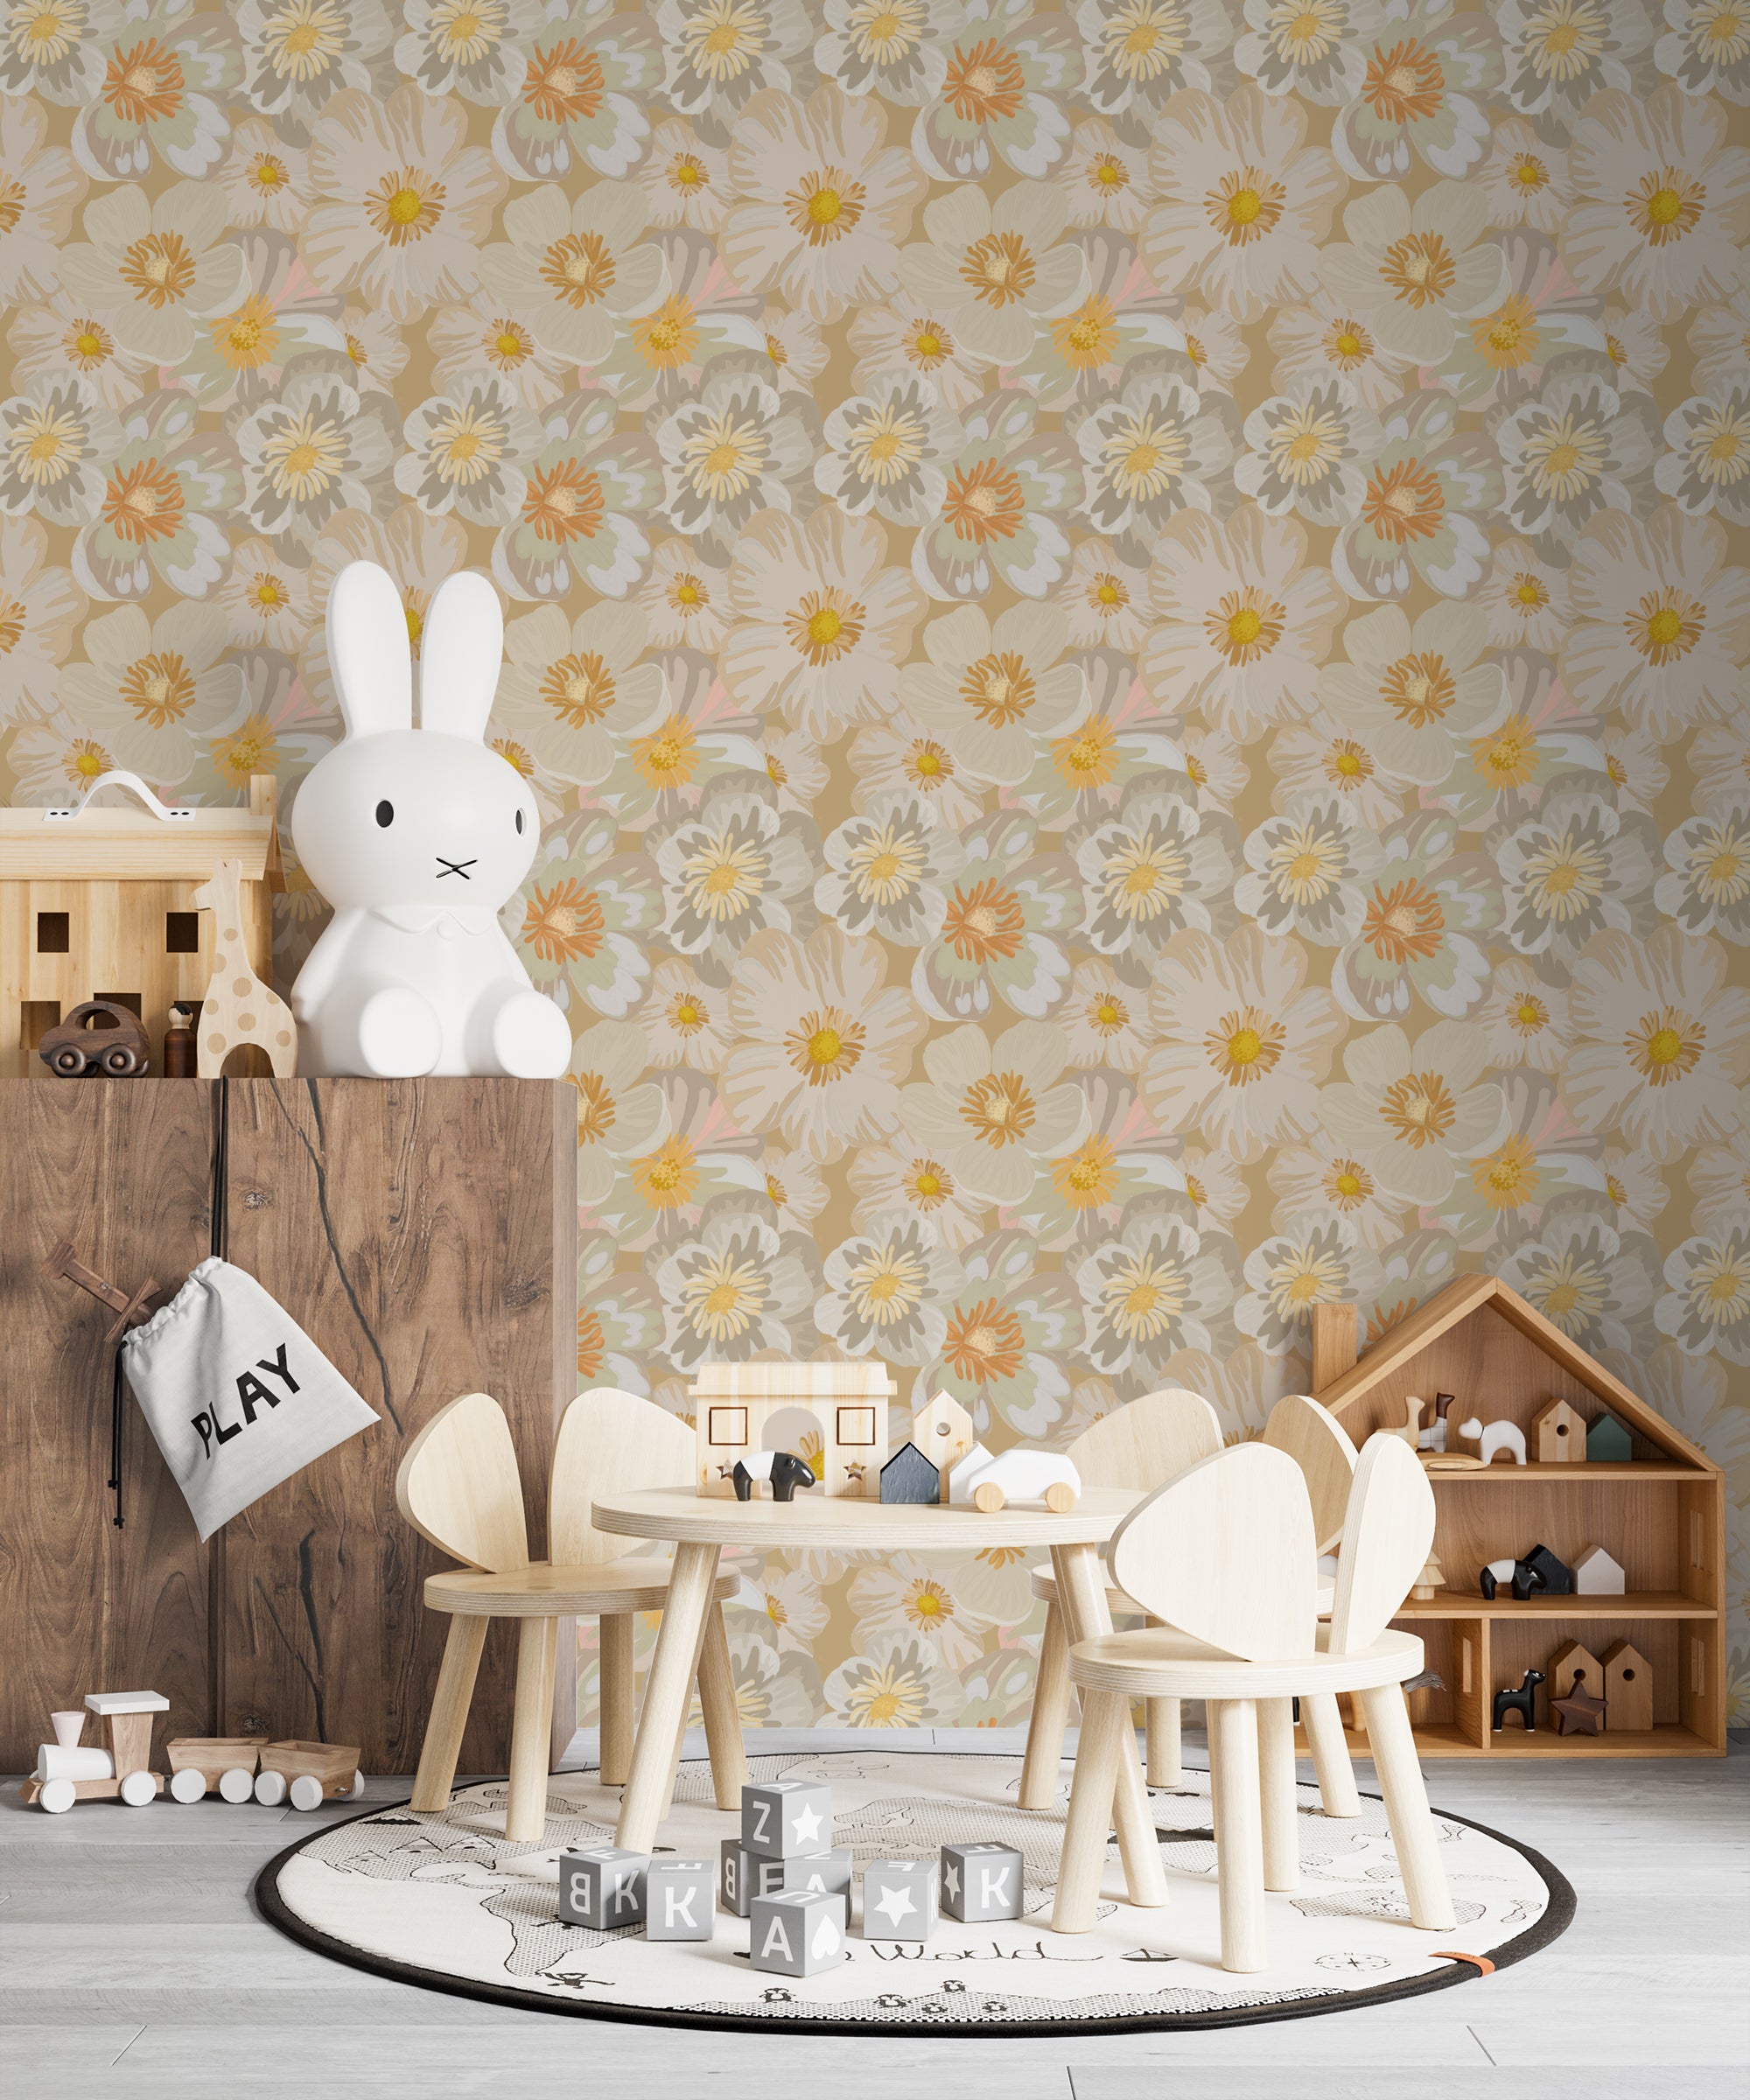 A children's playroom with furniture, including a small wooden table and chairs set, in front of a wall covered in 'Retro Flower Wallpaper' featuring a repeating pattern of large, stylized flowers in muted tones of cream, beige, yellow, and green